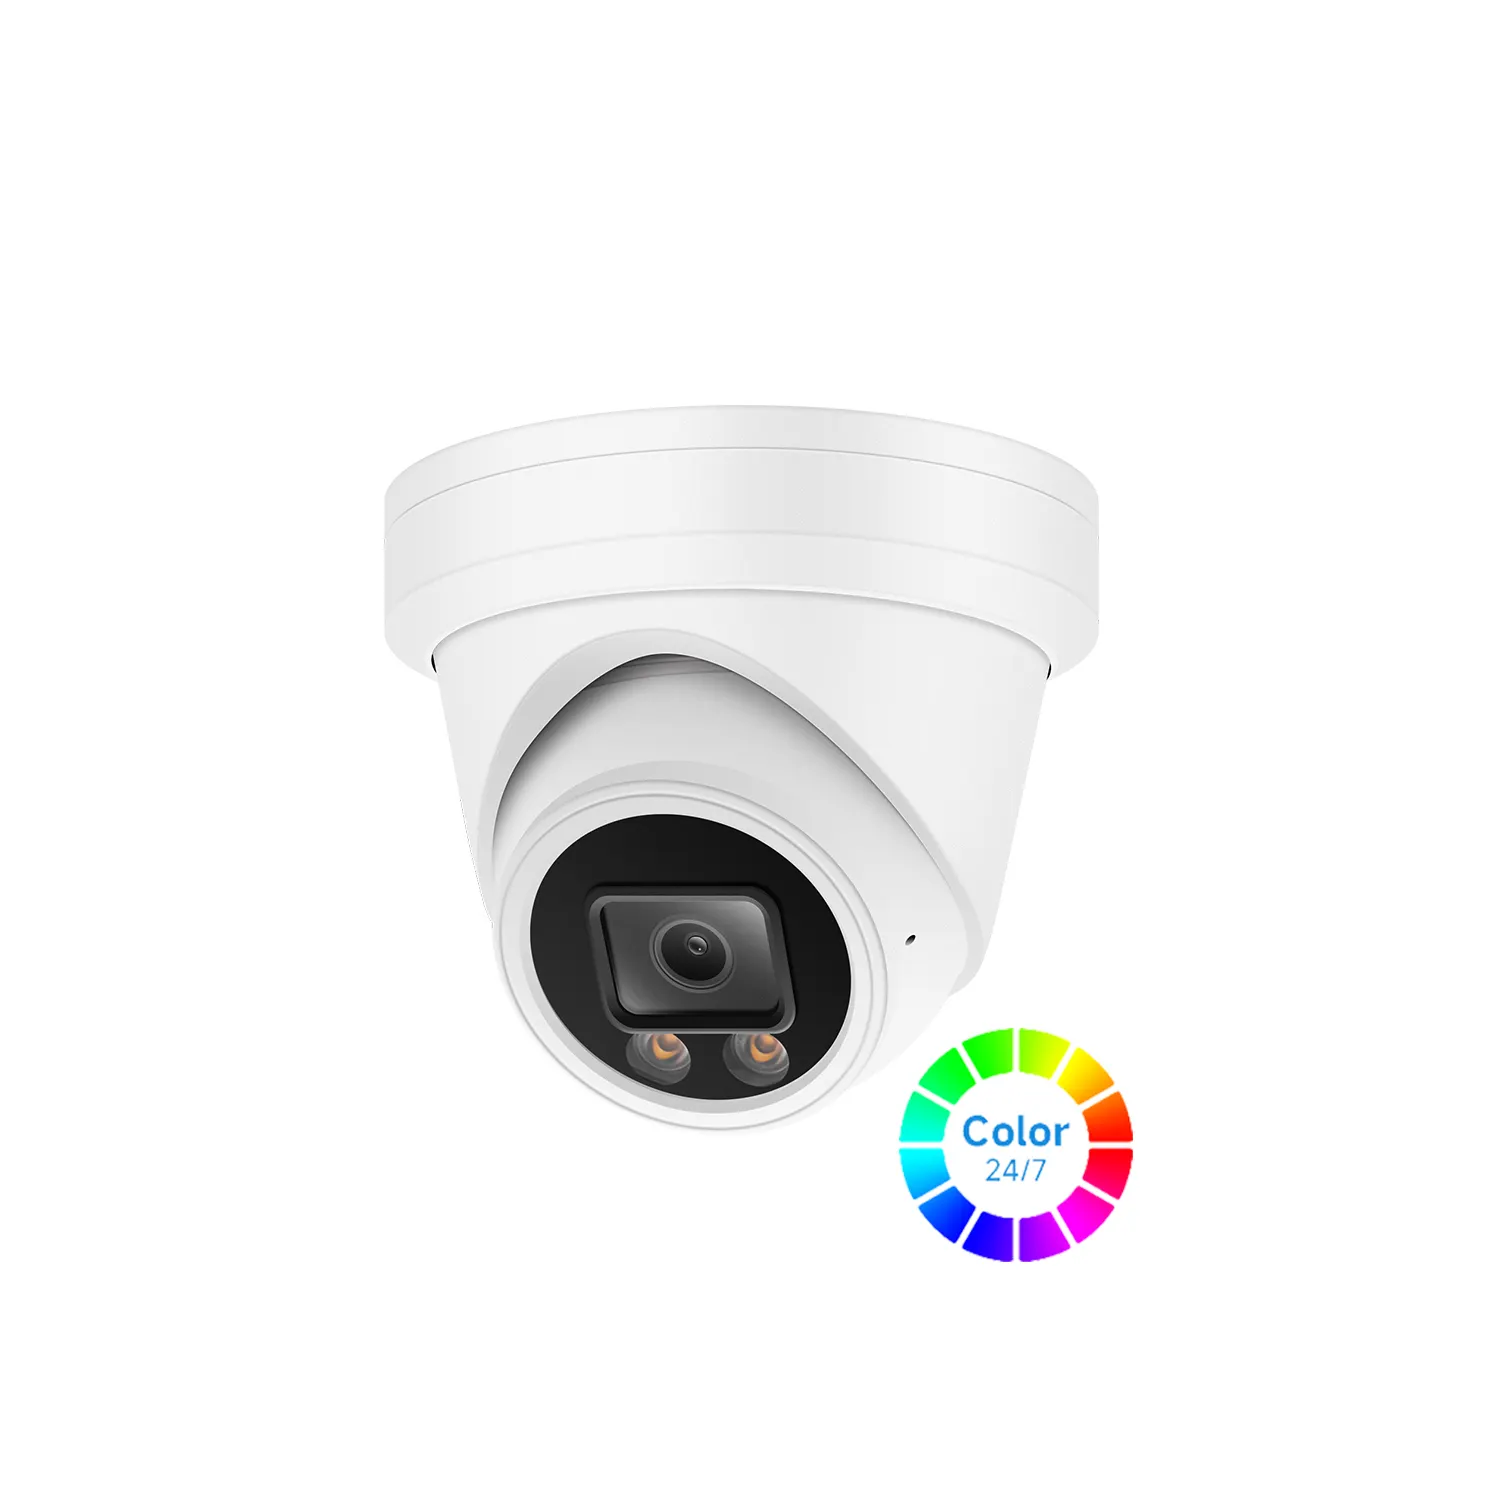 24/7 full color 8mp hd tvi 4k bnc camera turret 4 in 1 security dome cctv surveillance 2.8/3.6mm lens support audio over coaxial